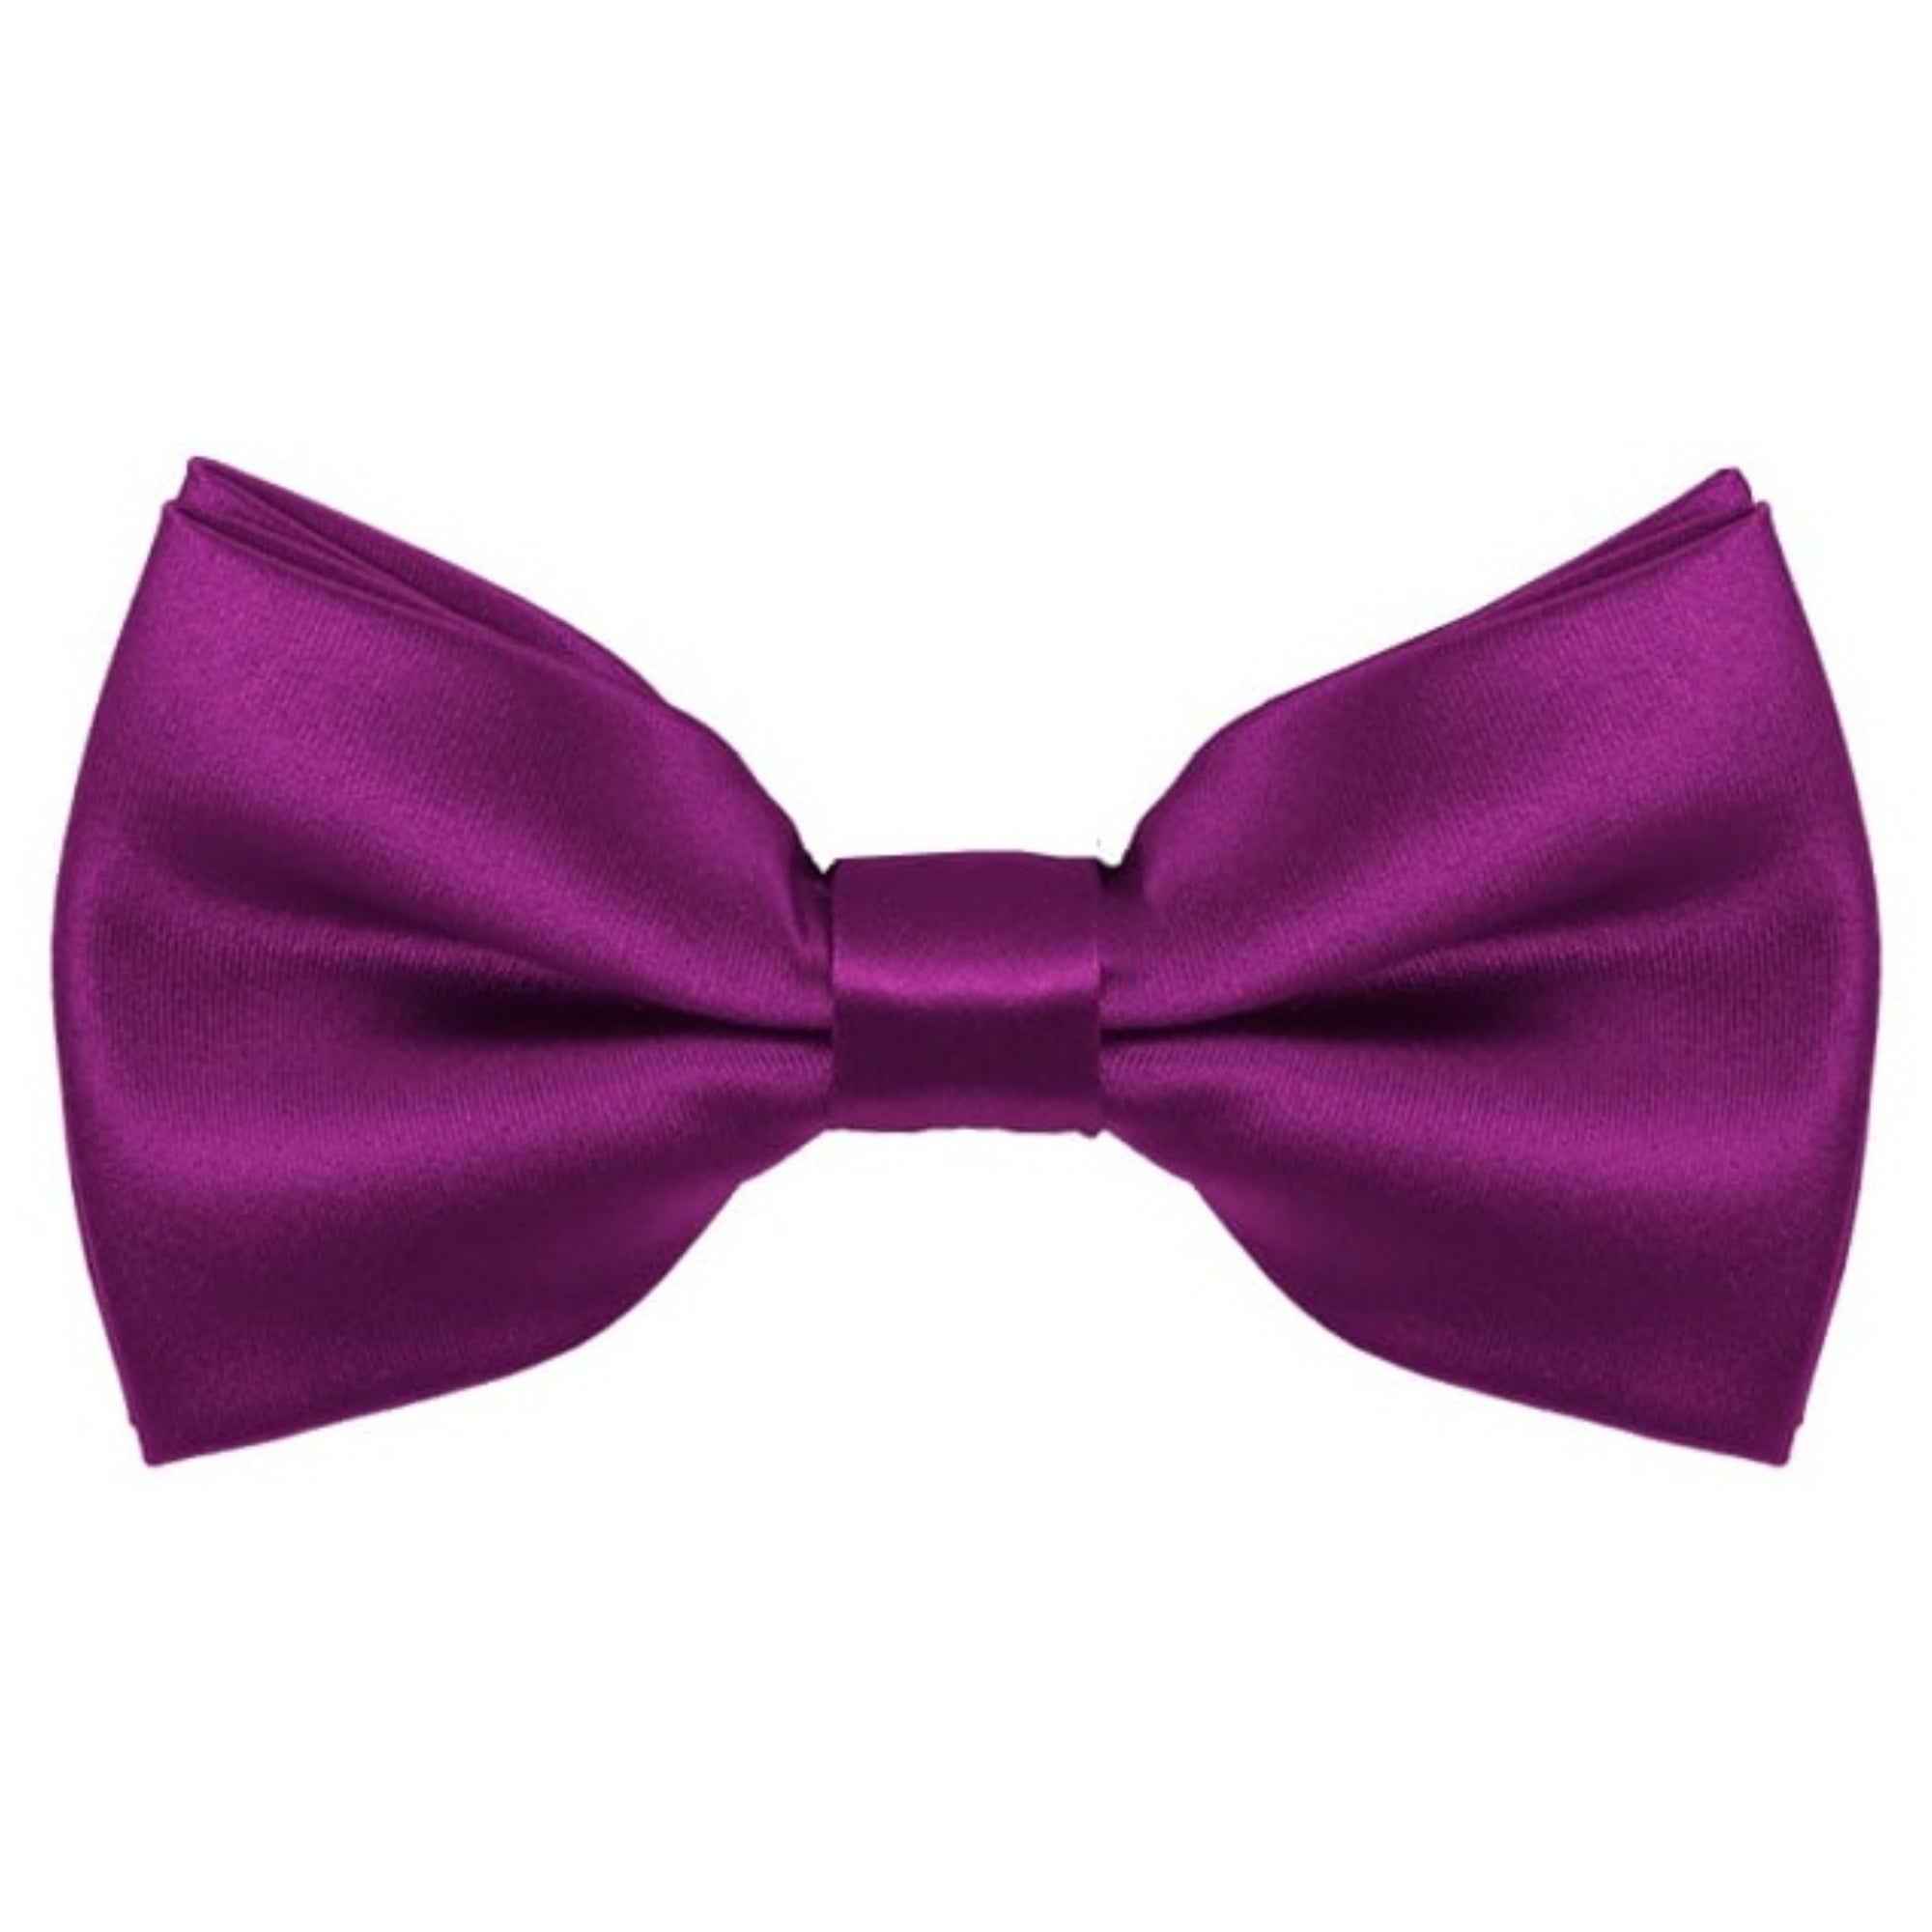 TheDapperTie Men's Solid Color 2.5 W And 4.5 L Inch Pre-Tied adjustable Bow Ties Men's Solid Color Bow Tie TheDapperTie Violet  